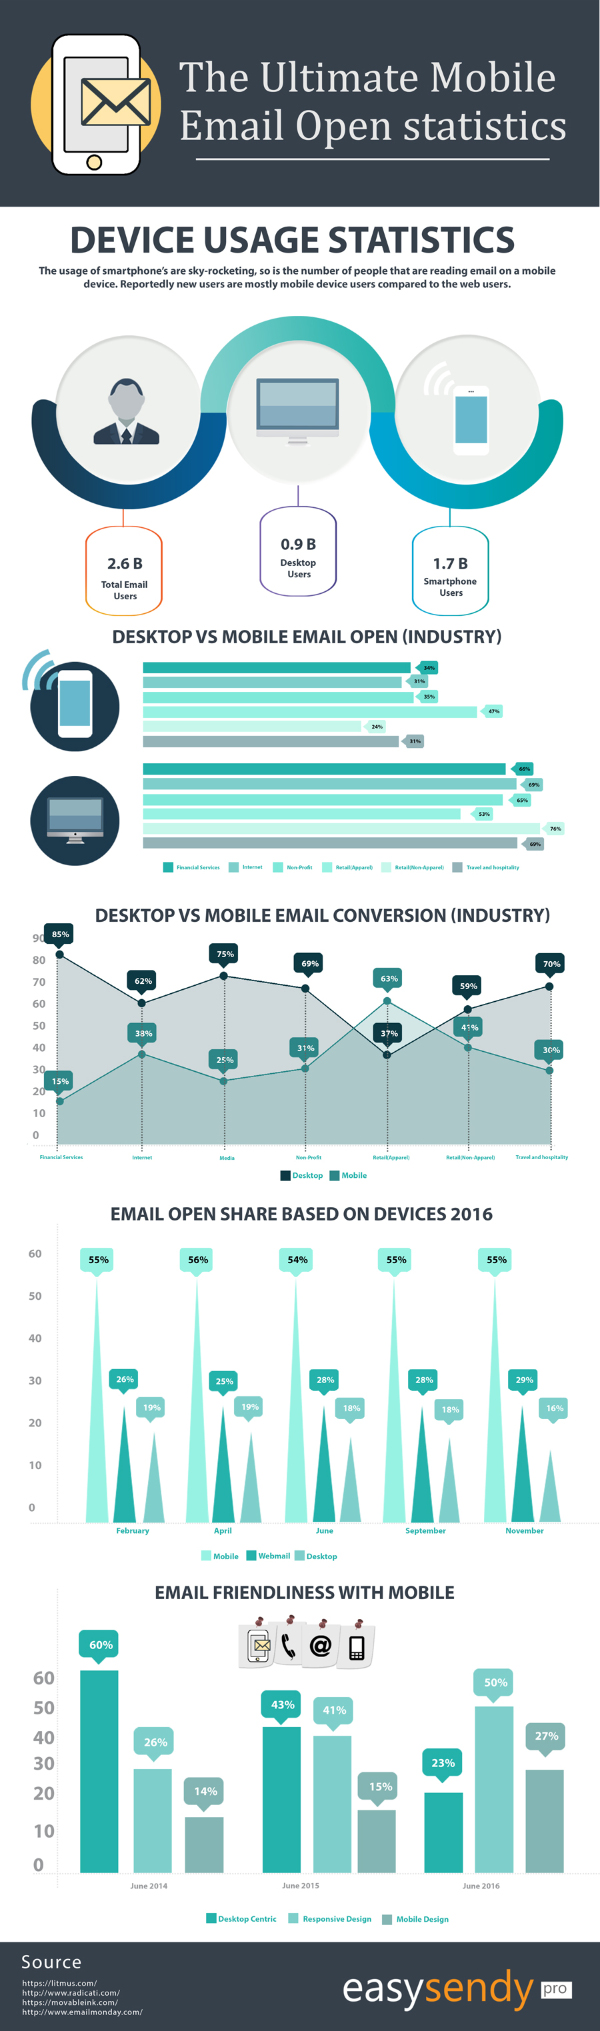 170217-infographic-mobile-email-open-statistics